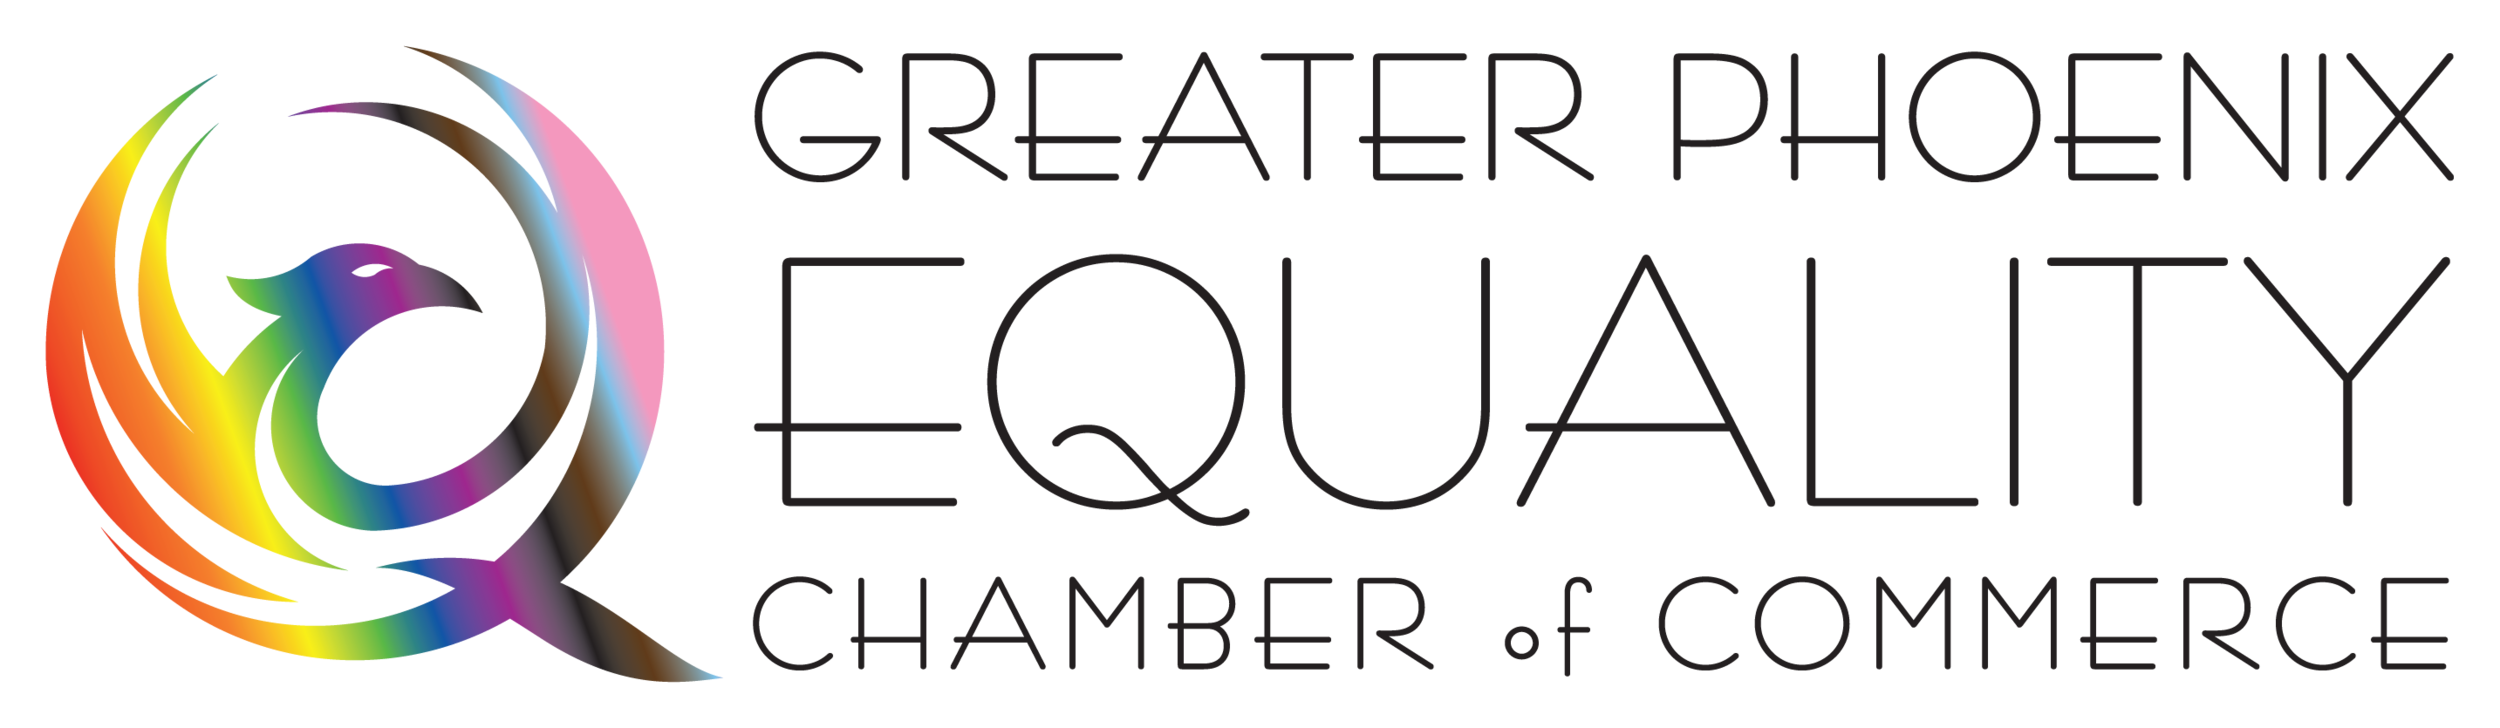 Pornix Com - Greater Phoenix Equality Chamber of Commerce